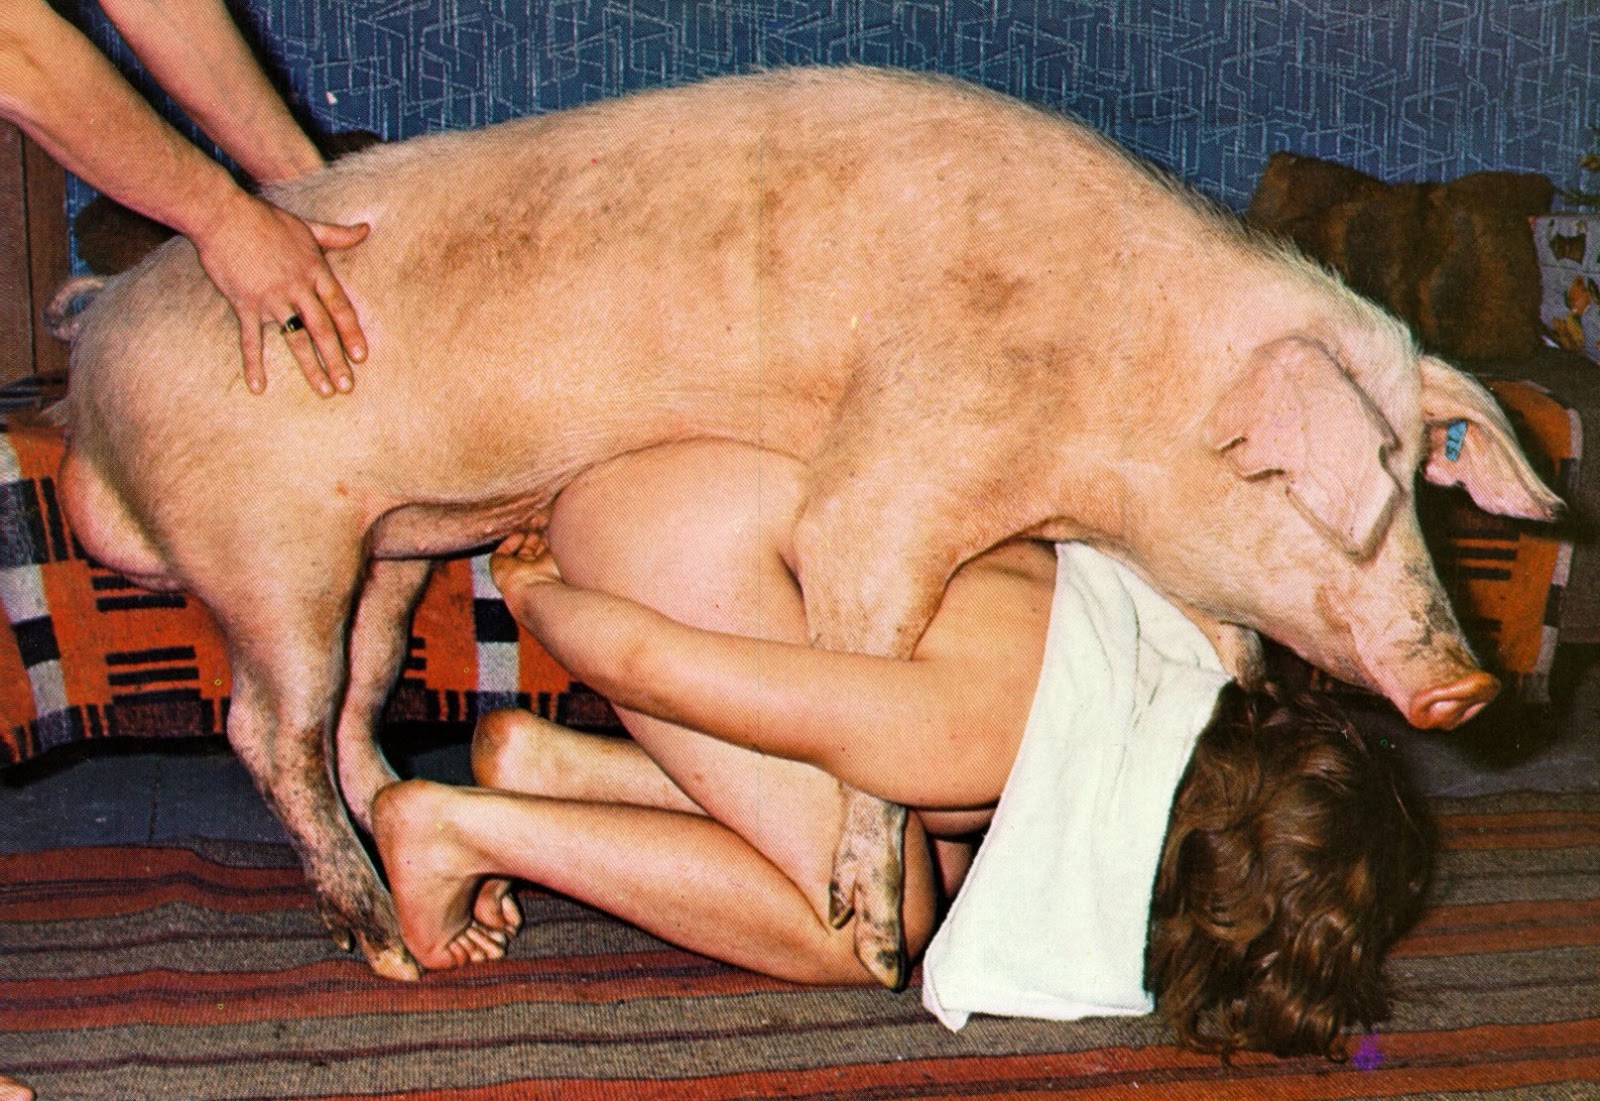 Boarsex - 🧡 Sex Worker Action Group Bestiality Pig Fuck Porn.